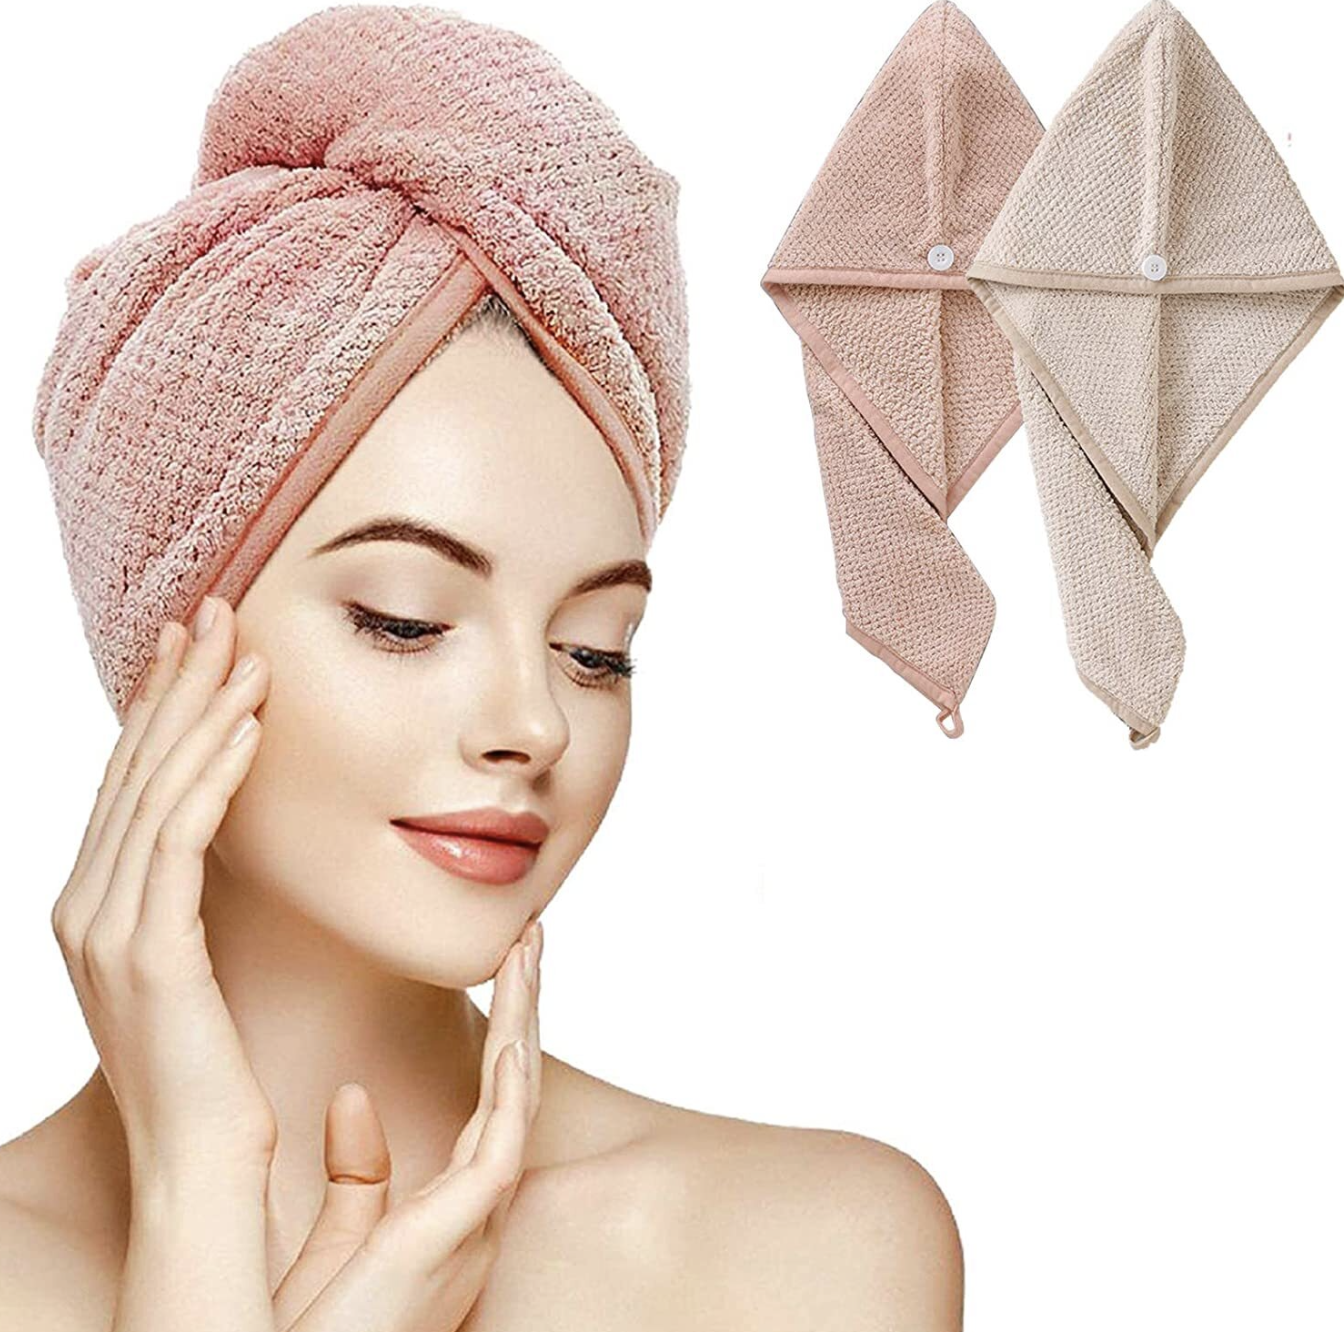 Someone wearing the hair wrap with two towels superimposed